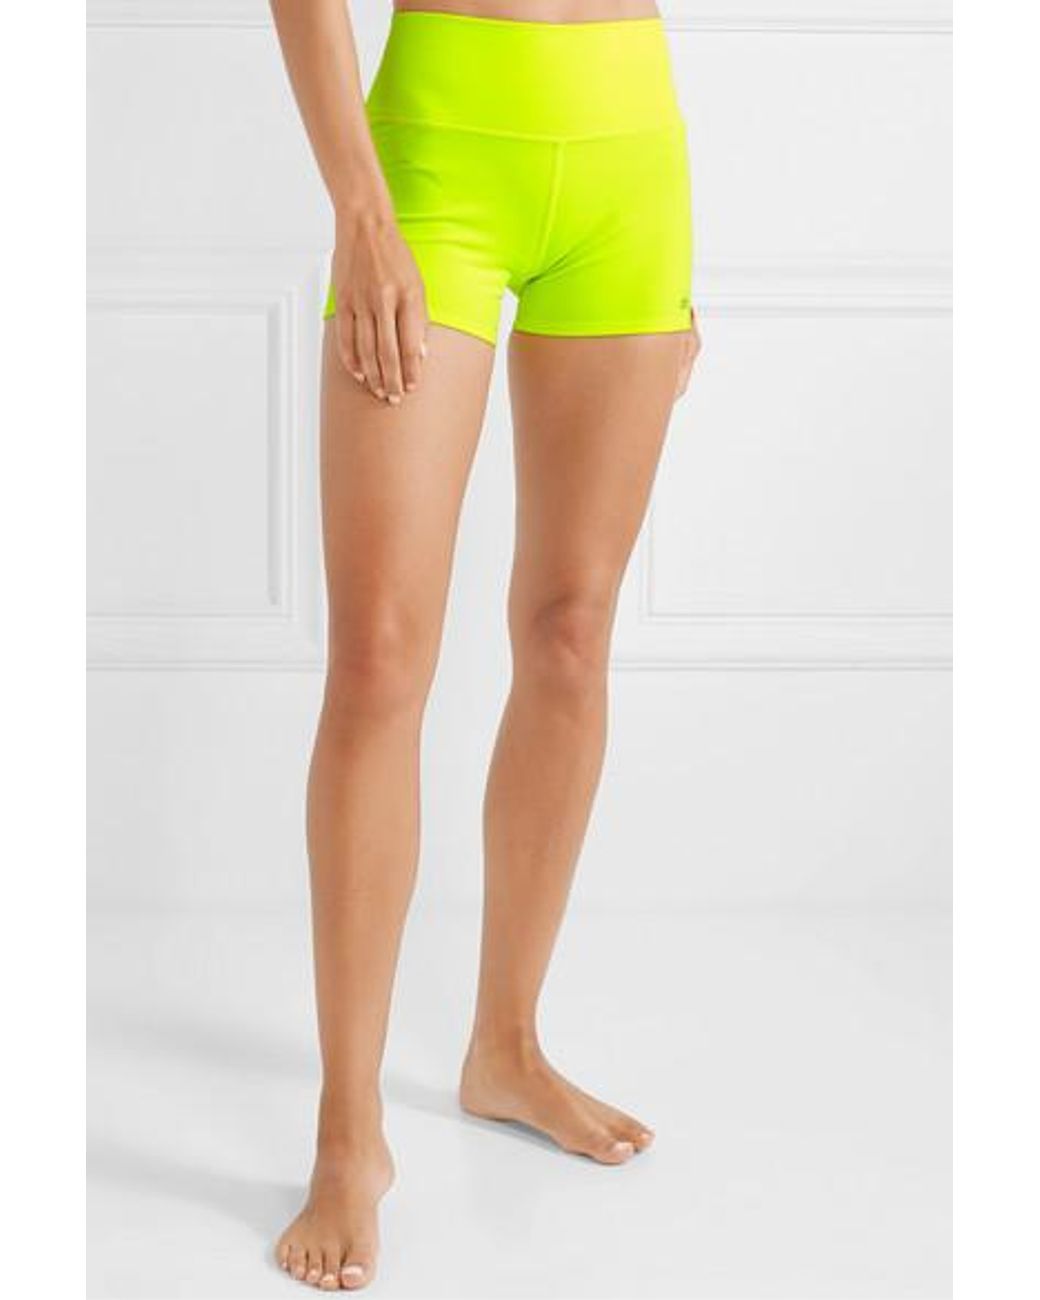 Alo Yoga Airbrush Neon Stretch Shorts in Yellow